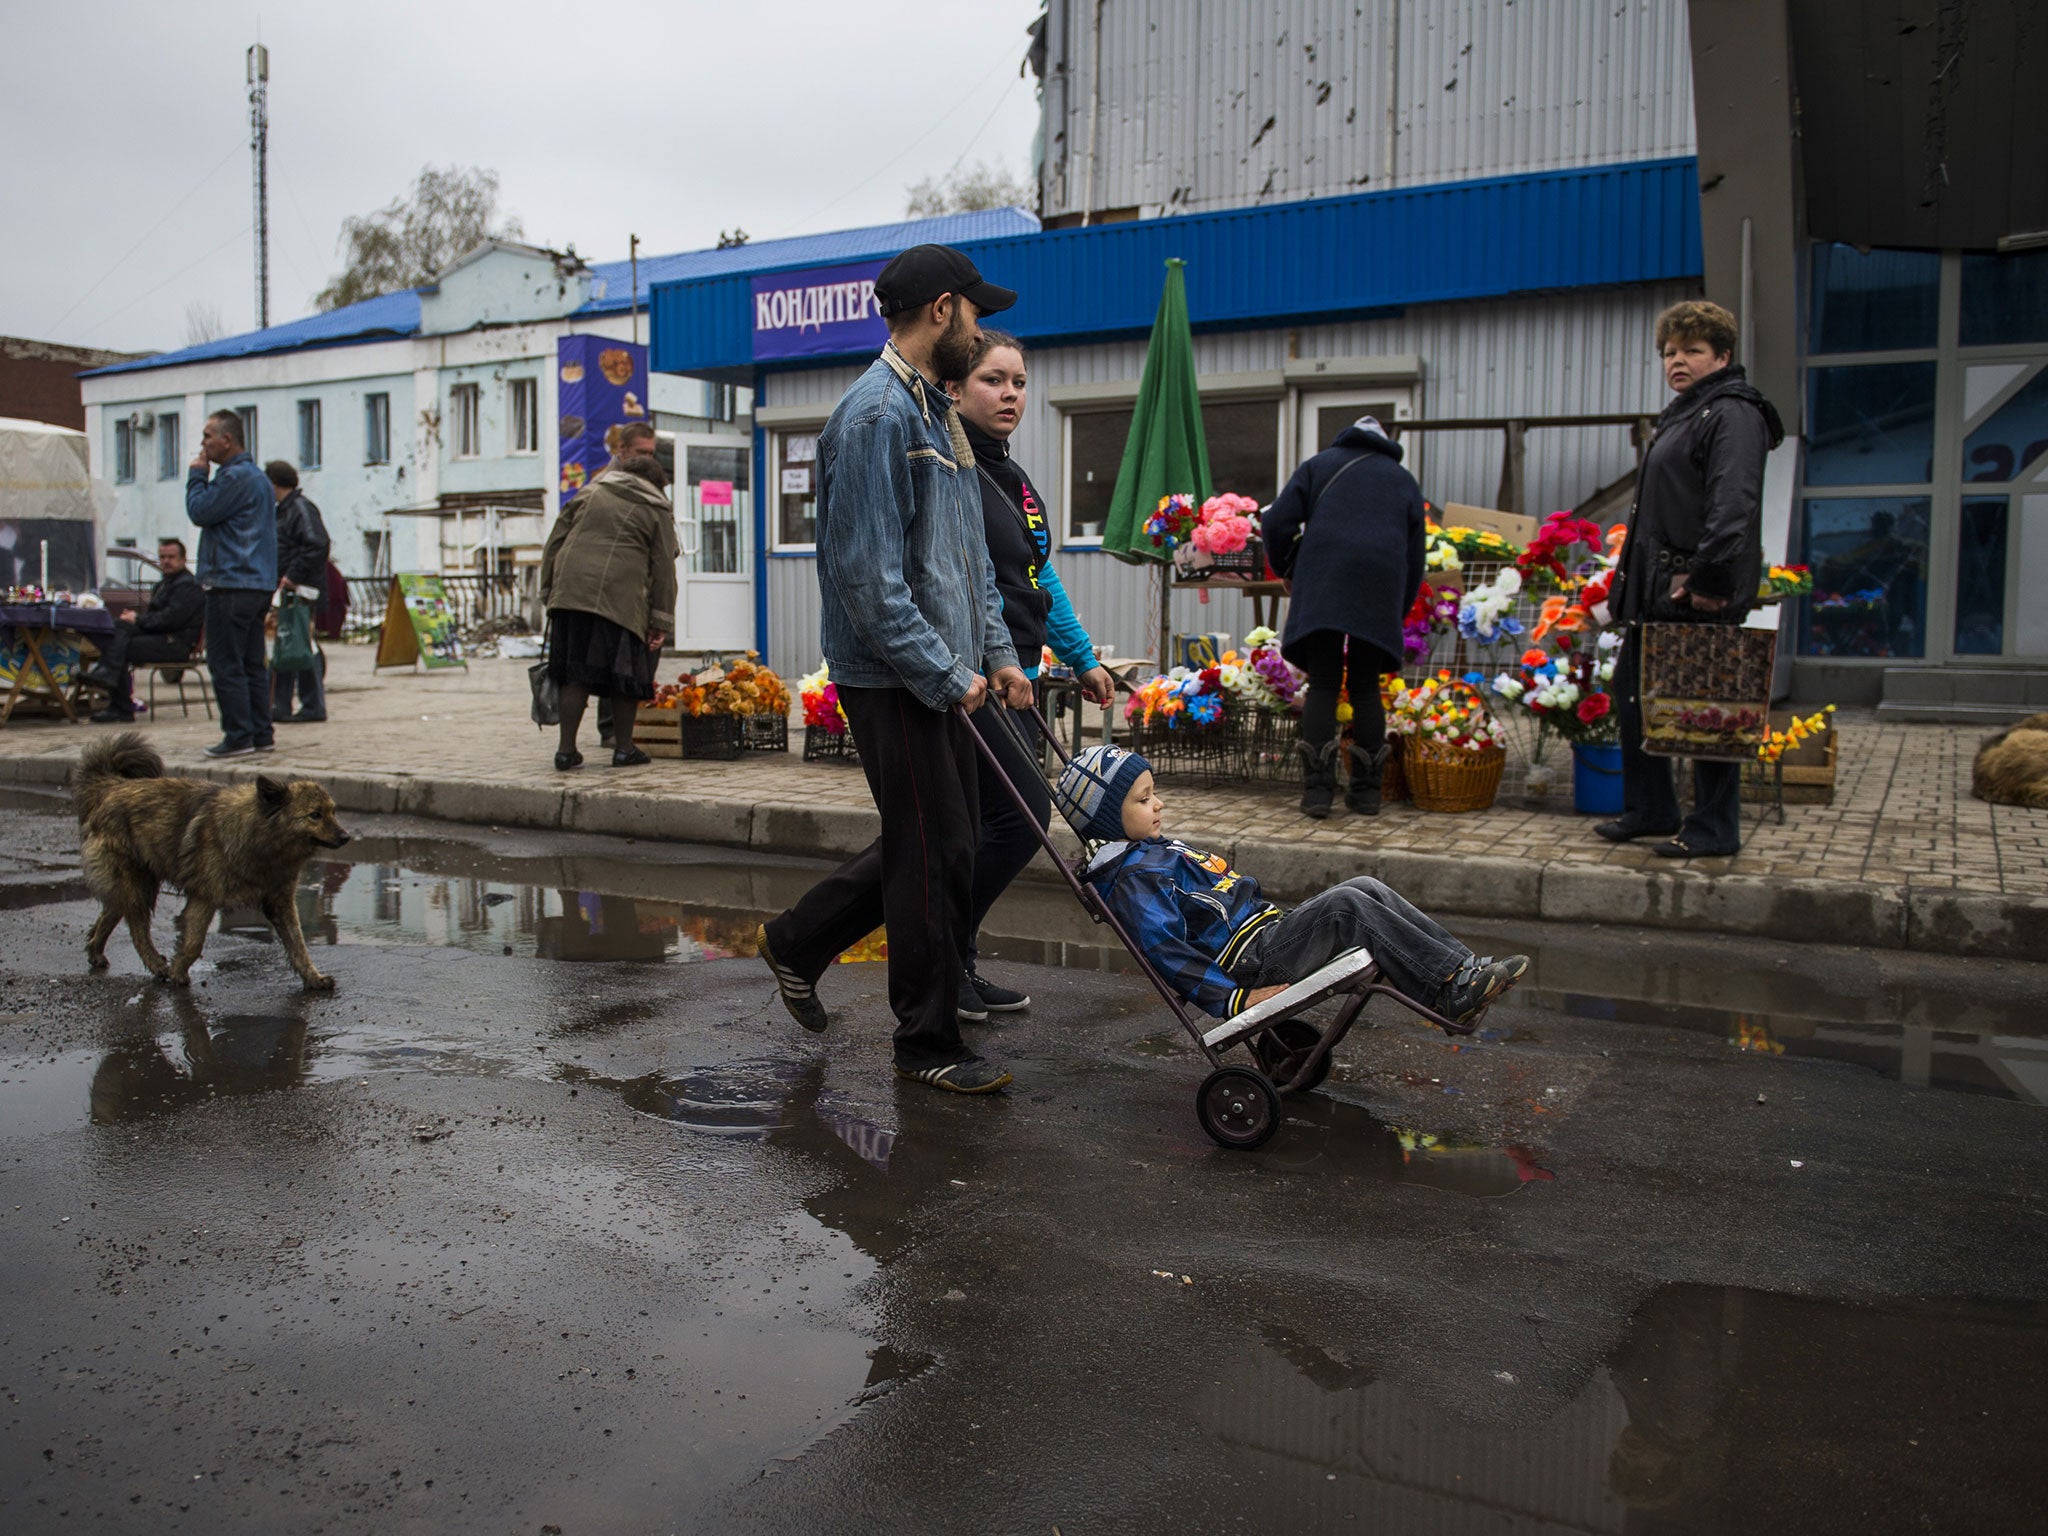 A family walks past a shrapnel damaged building and street vendors at a market by the railway station near the frontline in Donetsk